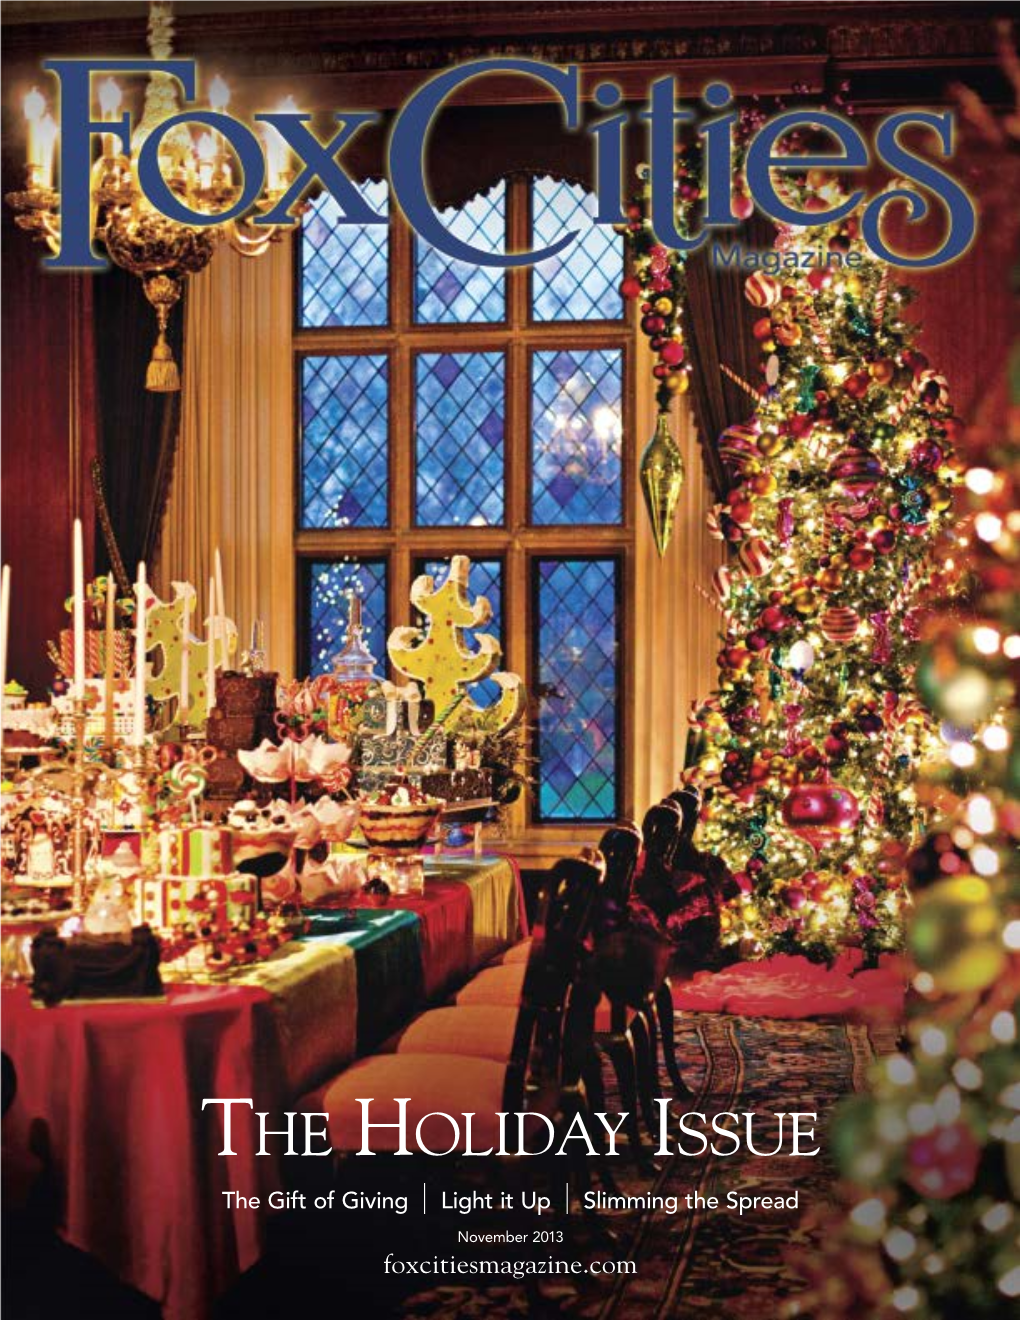 The Holiday Issue